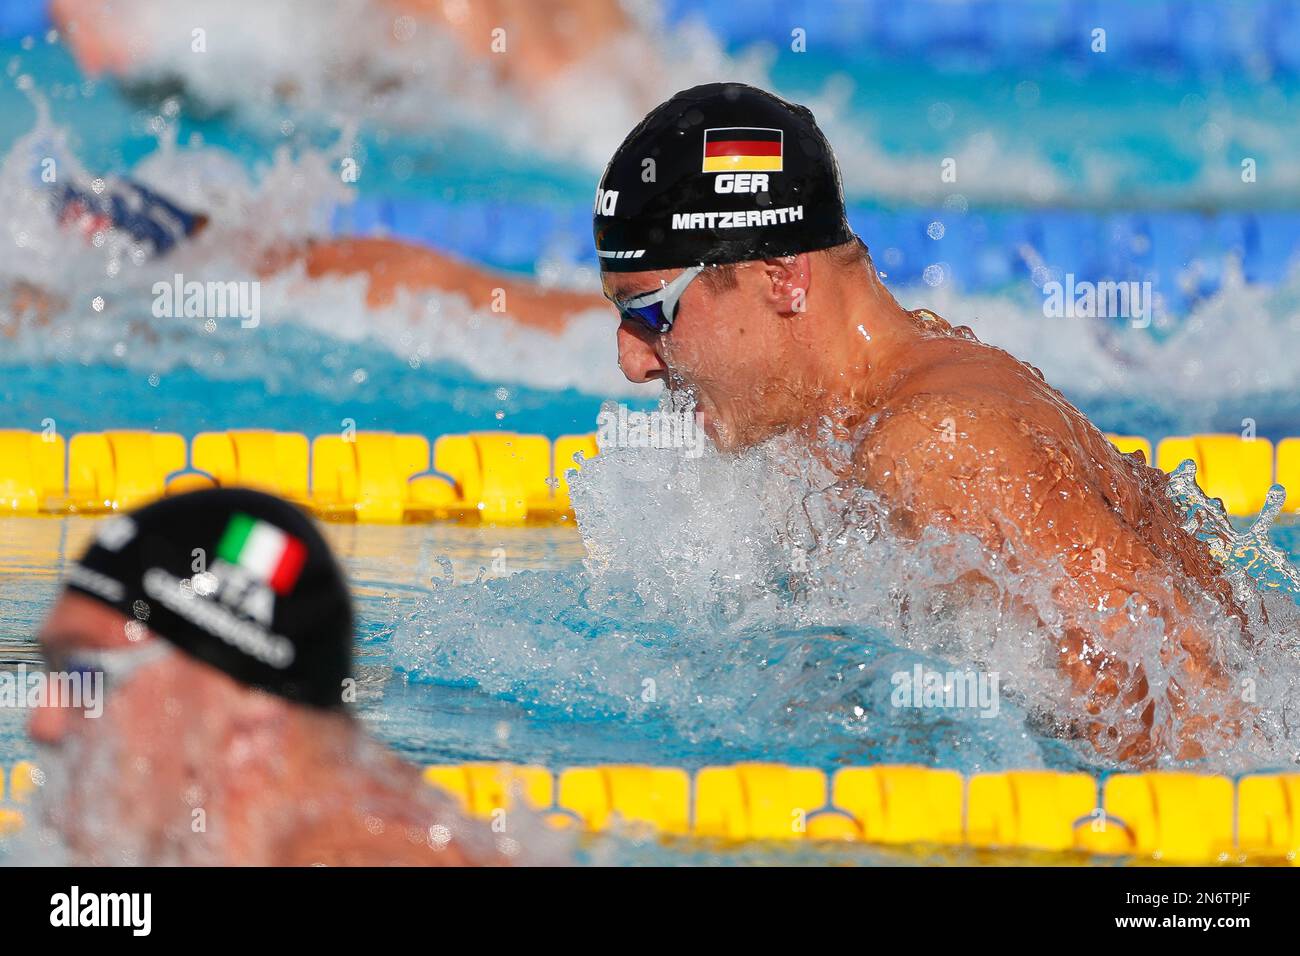 Rome, Italy, 15 August 2022. Lucas Matzerath of Germany competes during the LEN European Aquatics Championships 2022 at Stadio del Nuoto in Rome, Italy. August 15, 2022. Credit: Nikola Krstic/Alamy Stock Photo